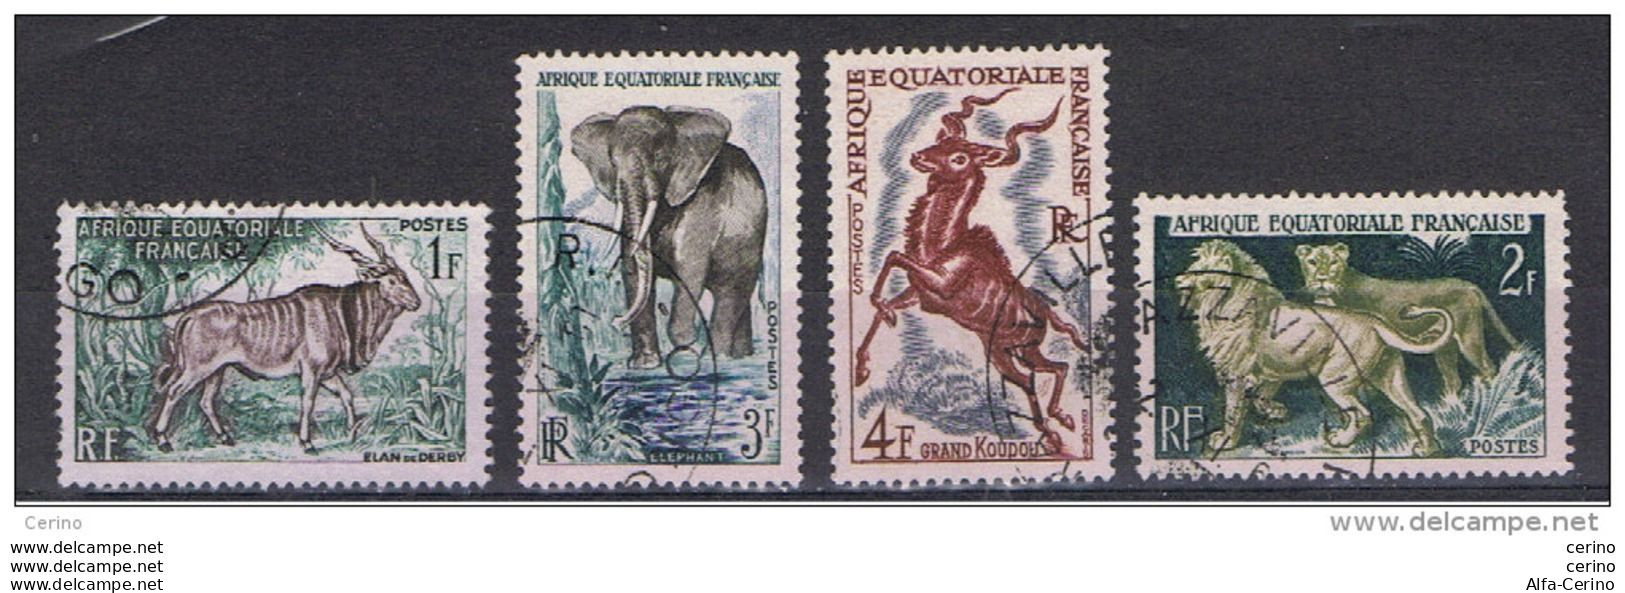 AFR..EQUATORIALE  FRANCESE:  1957  FAUNA  AFRICANA  -  S. CPL. 4  VAL. US. -  YV/TELL. 238/41 - Usati